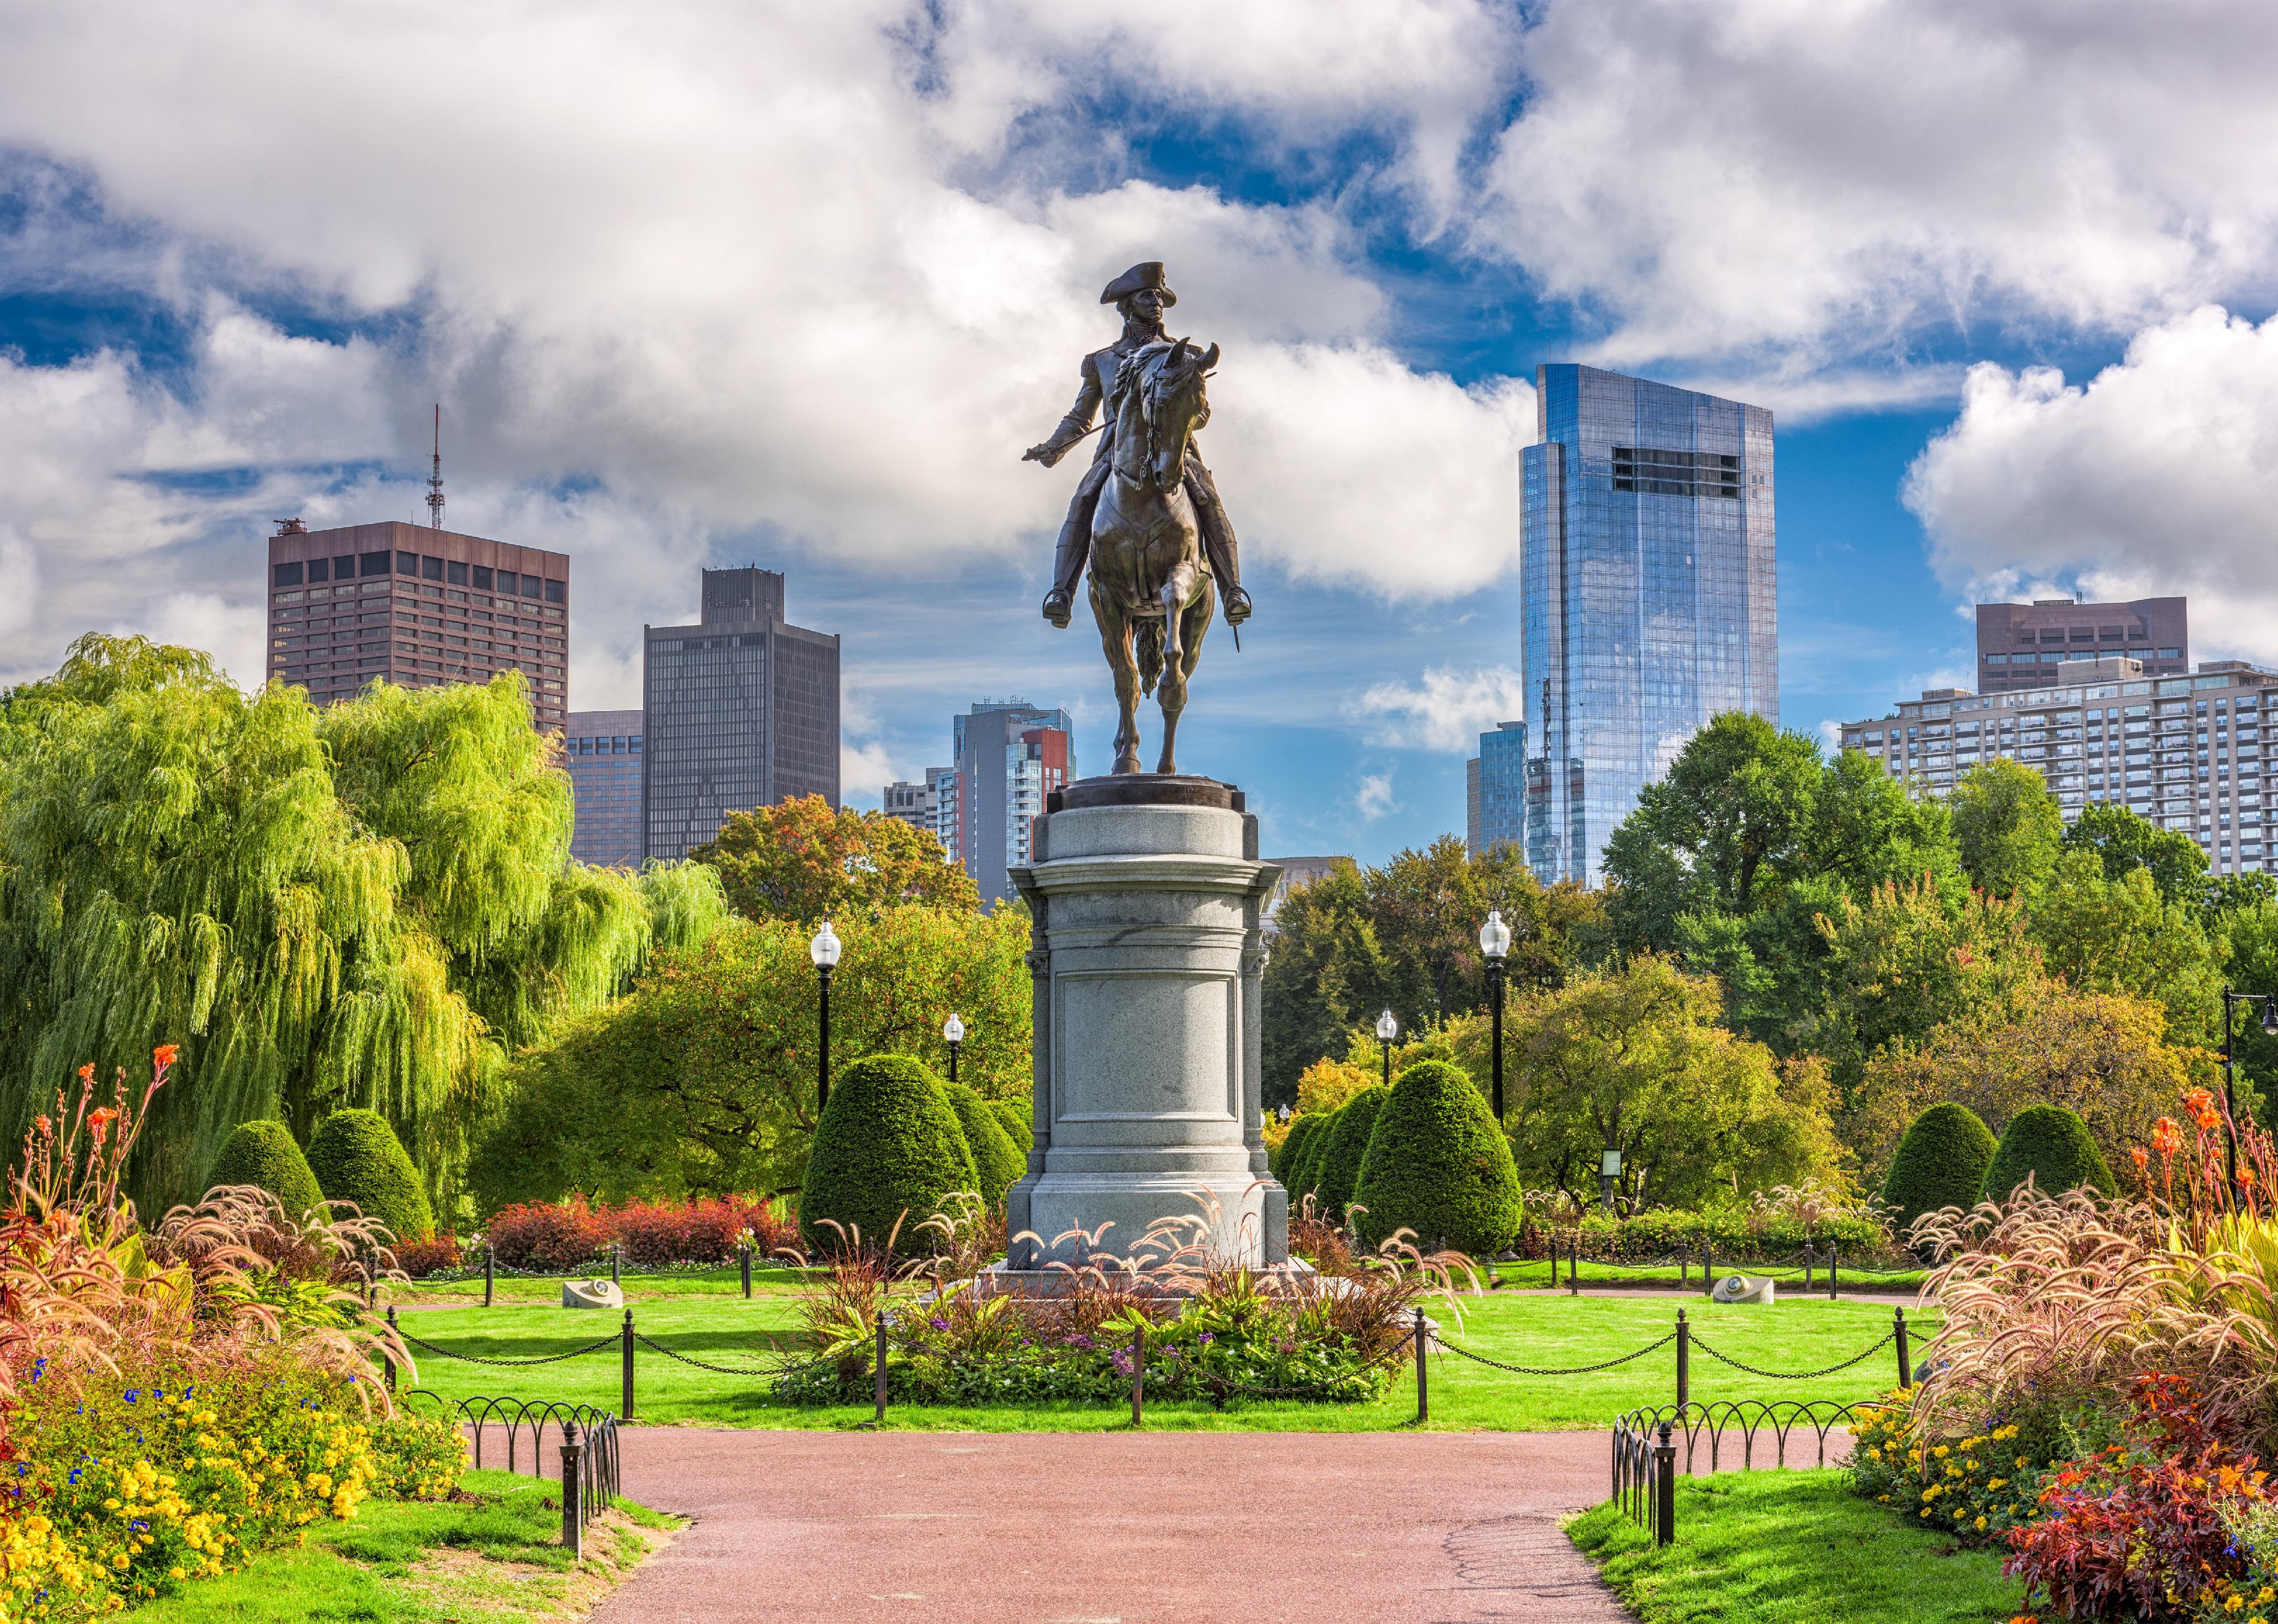 A statue of a man on a horse with the Boston skyline in the background.